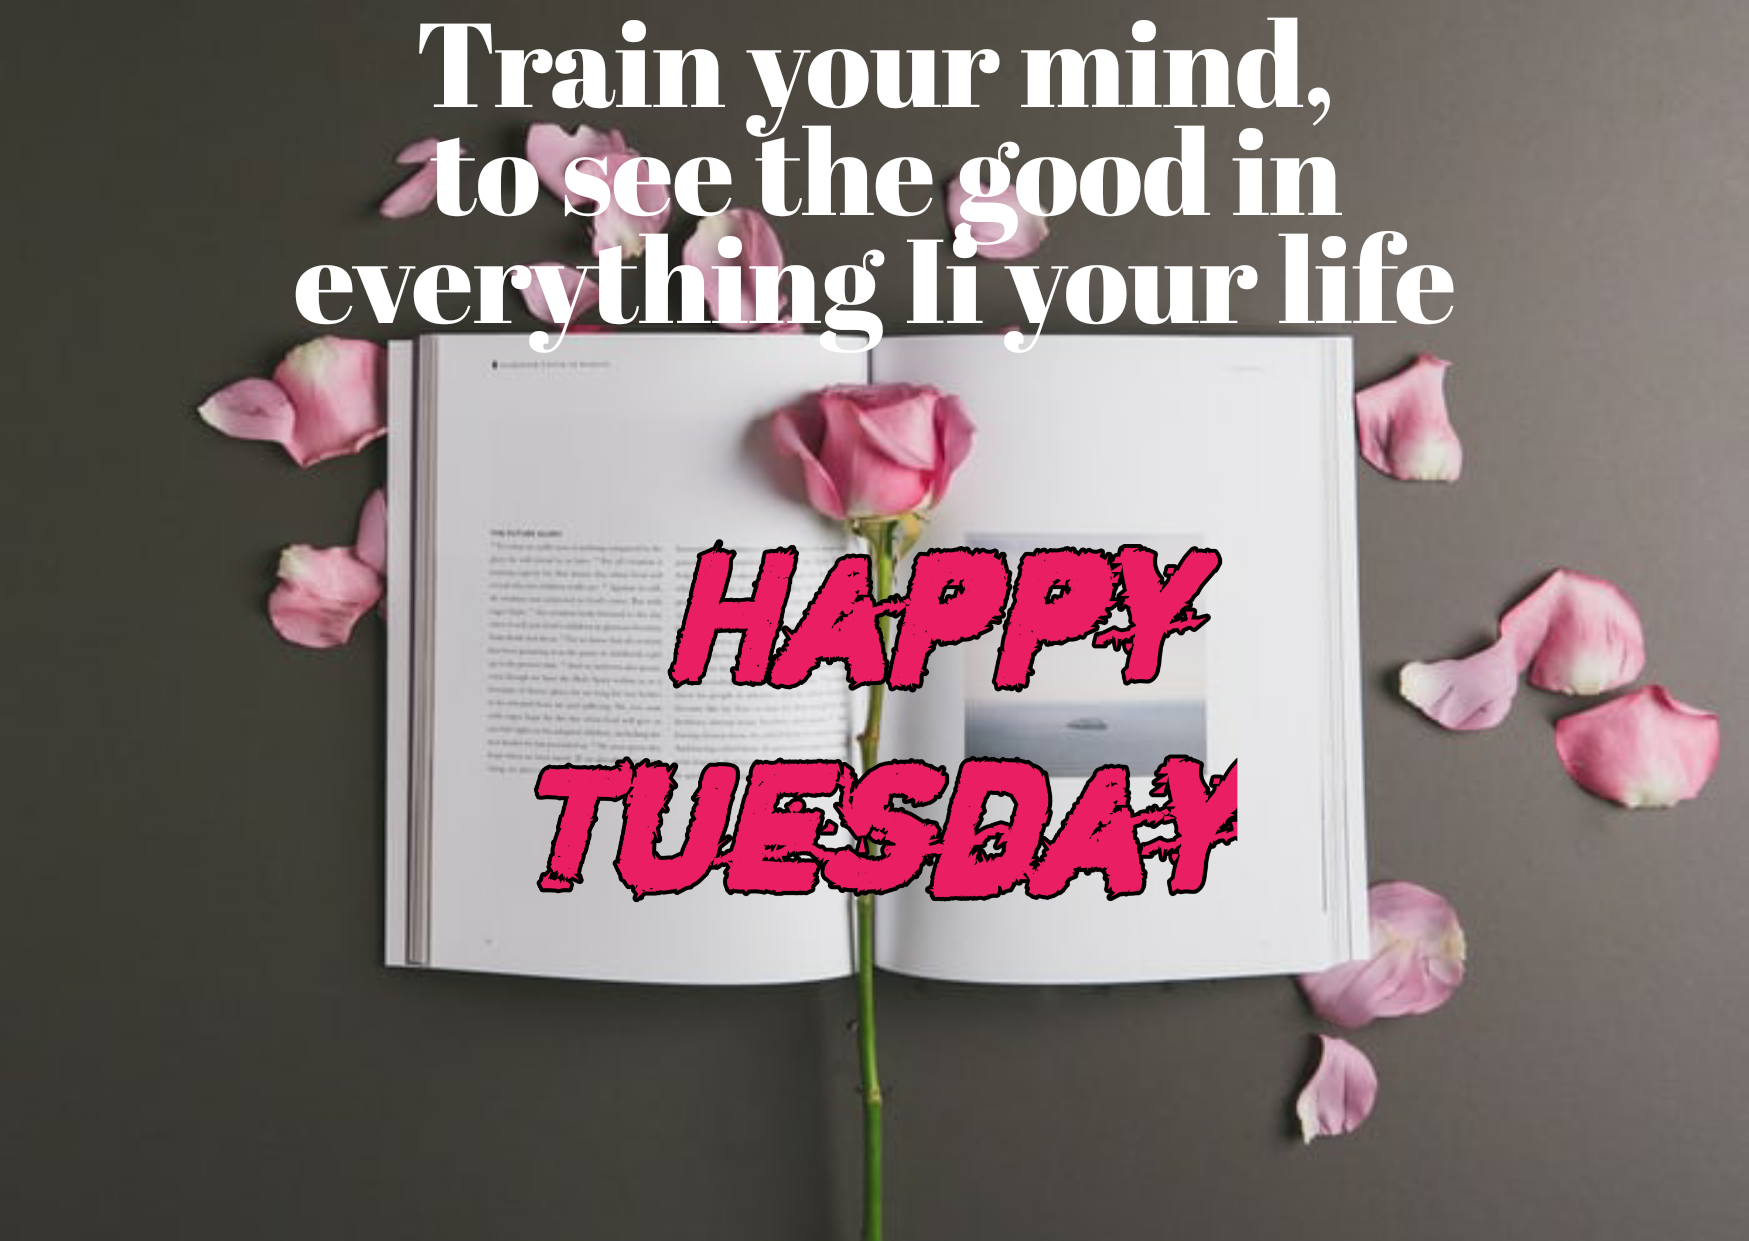 Happy Tuesday images, wishes, wallpaper, quotes, for whatsapp, Facebook,